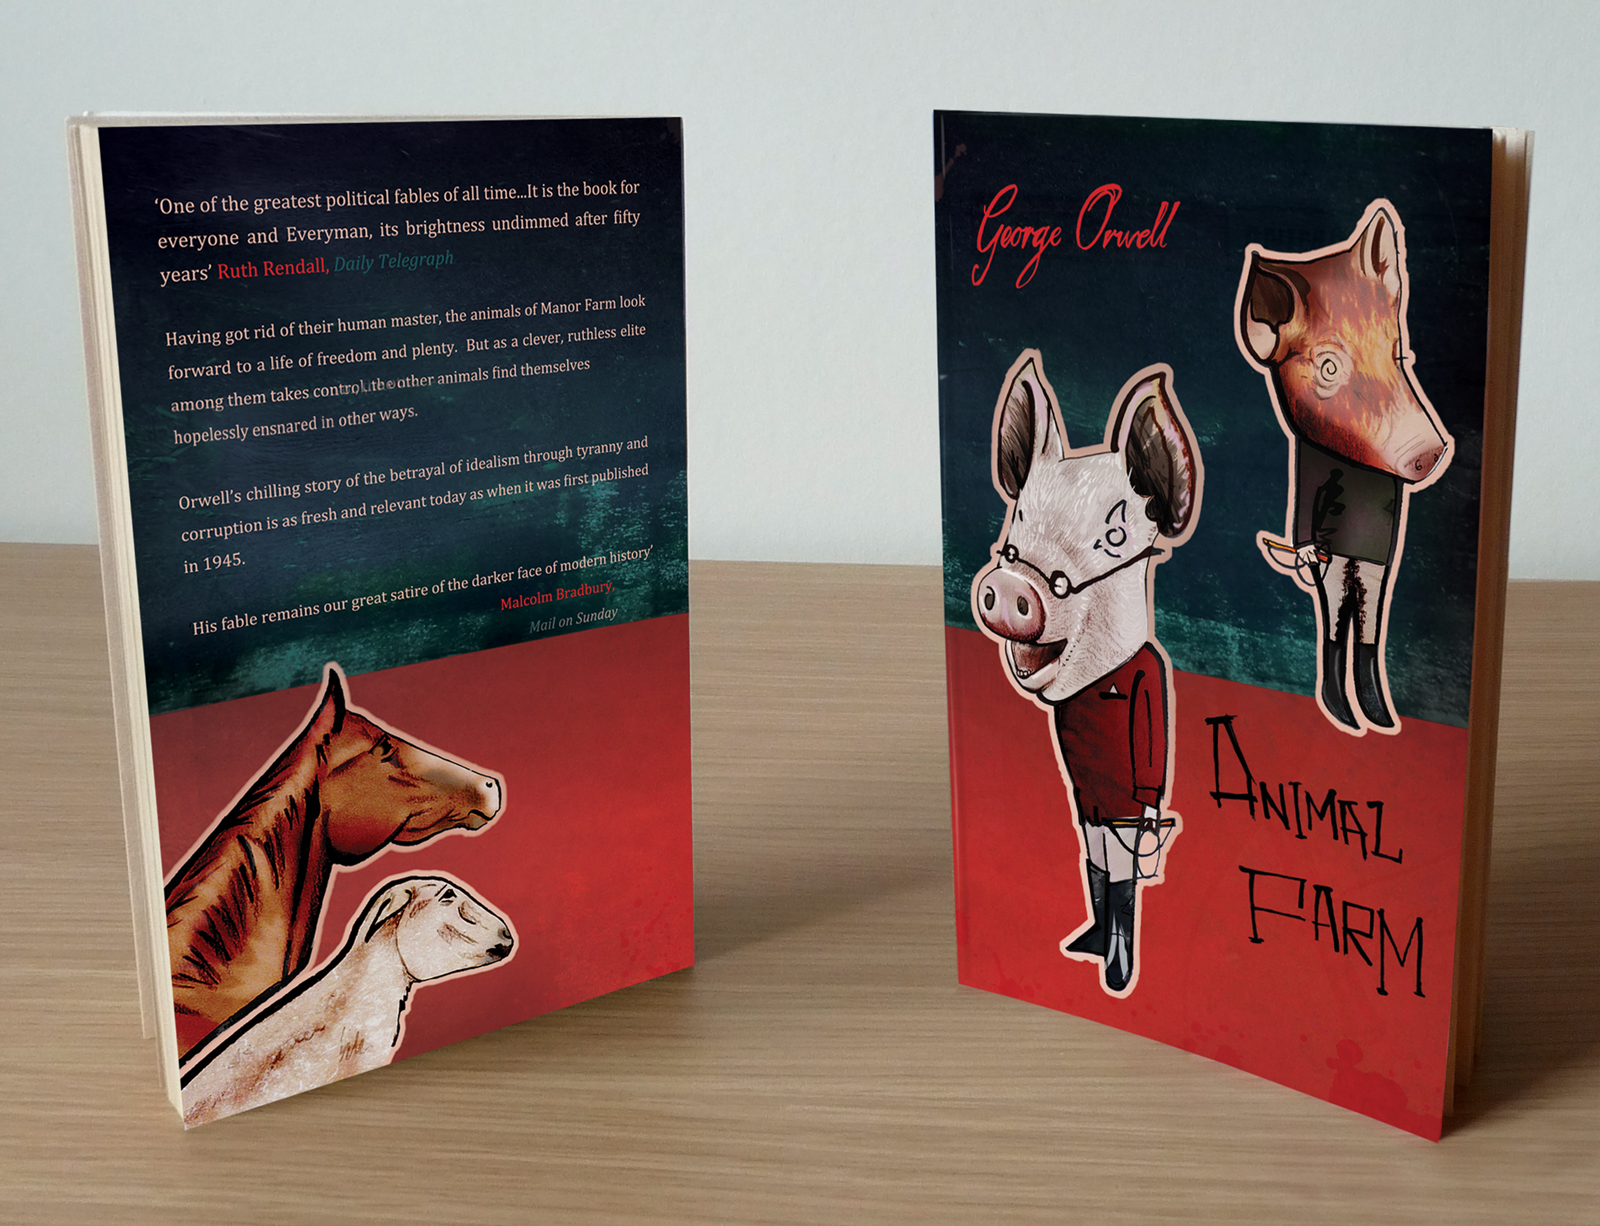 Paper Animal Farm cover by Helen Nowell